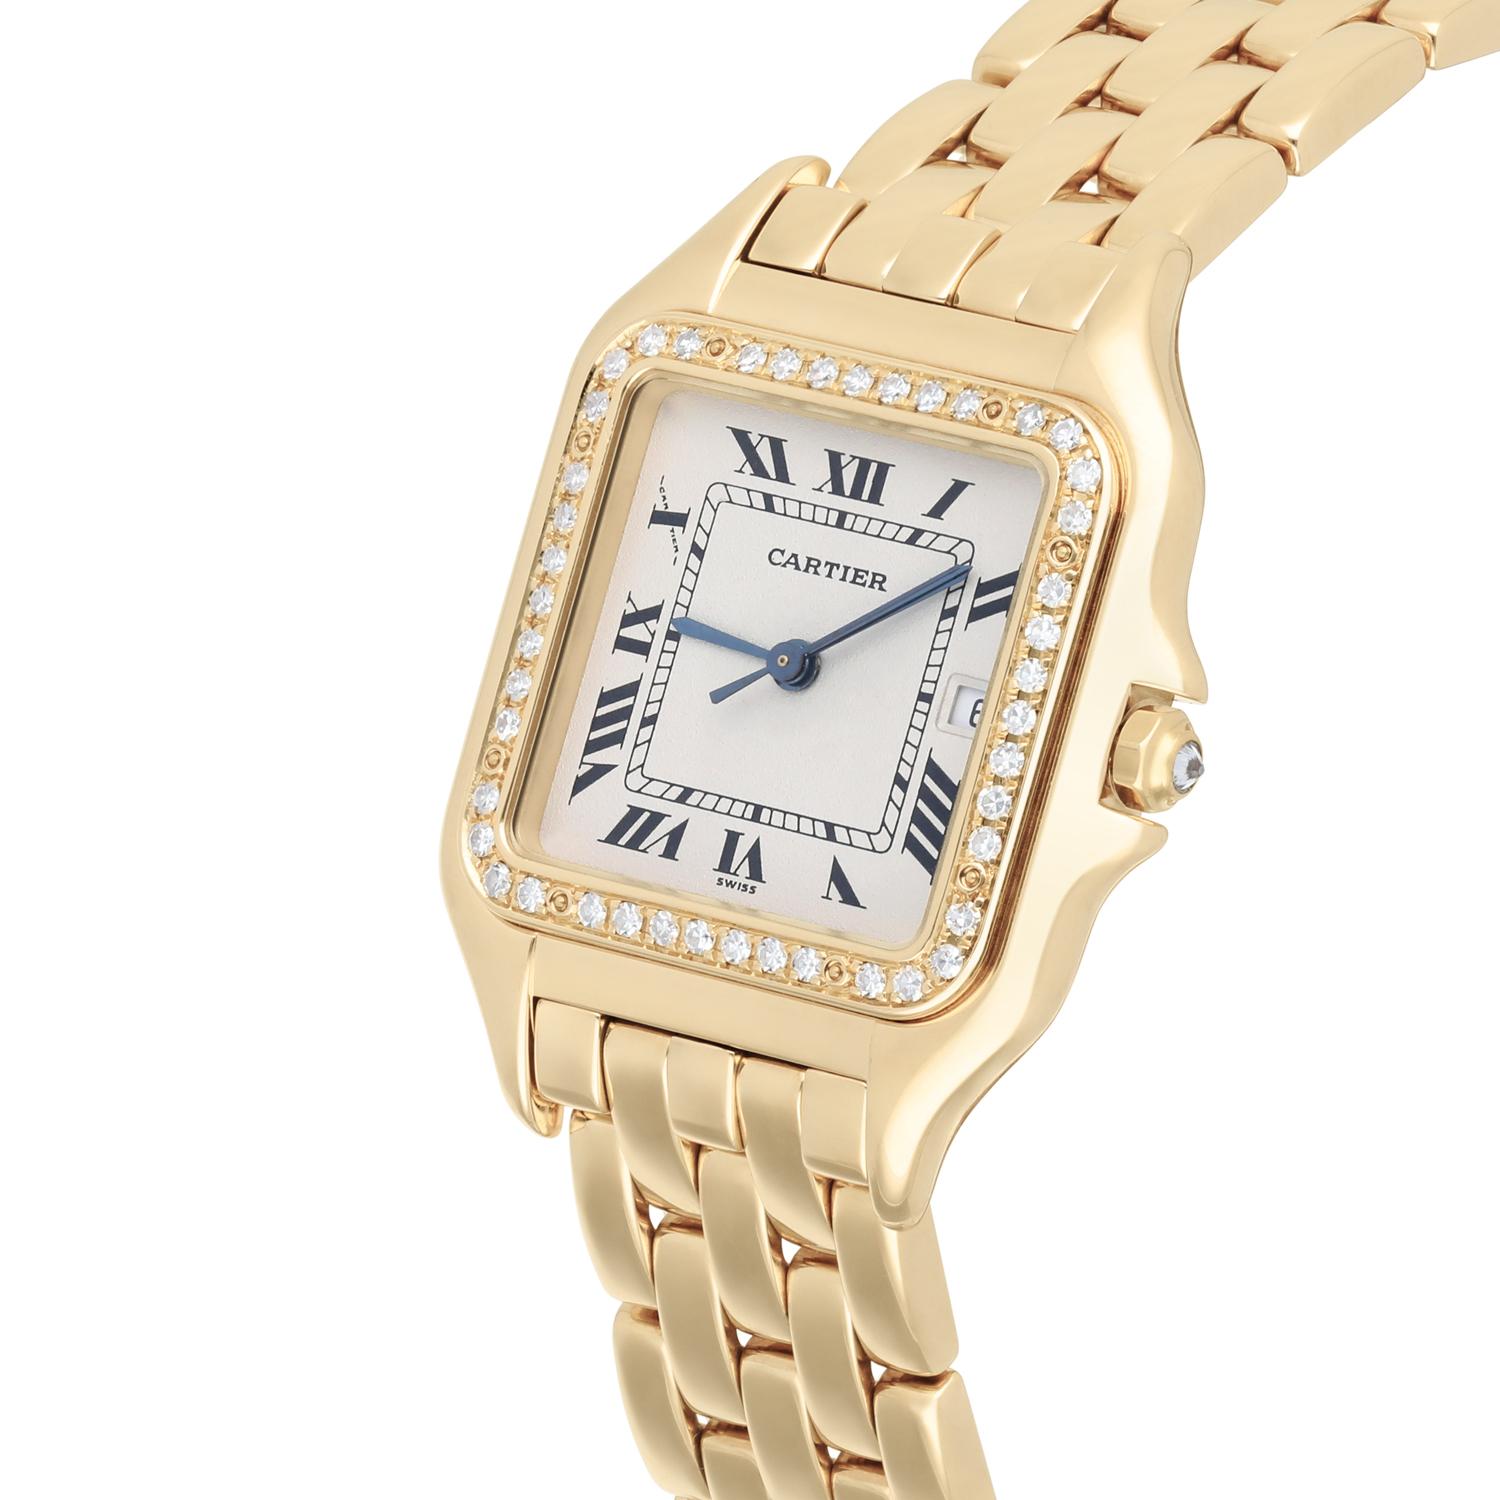 Modern Cartier Panthere 29mm Ladies Large 18K Yellow Gold Watch with Diamonds 887968